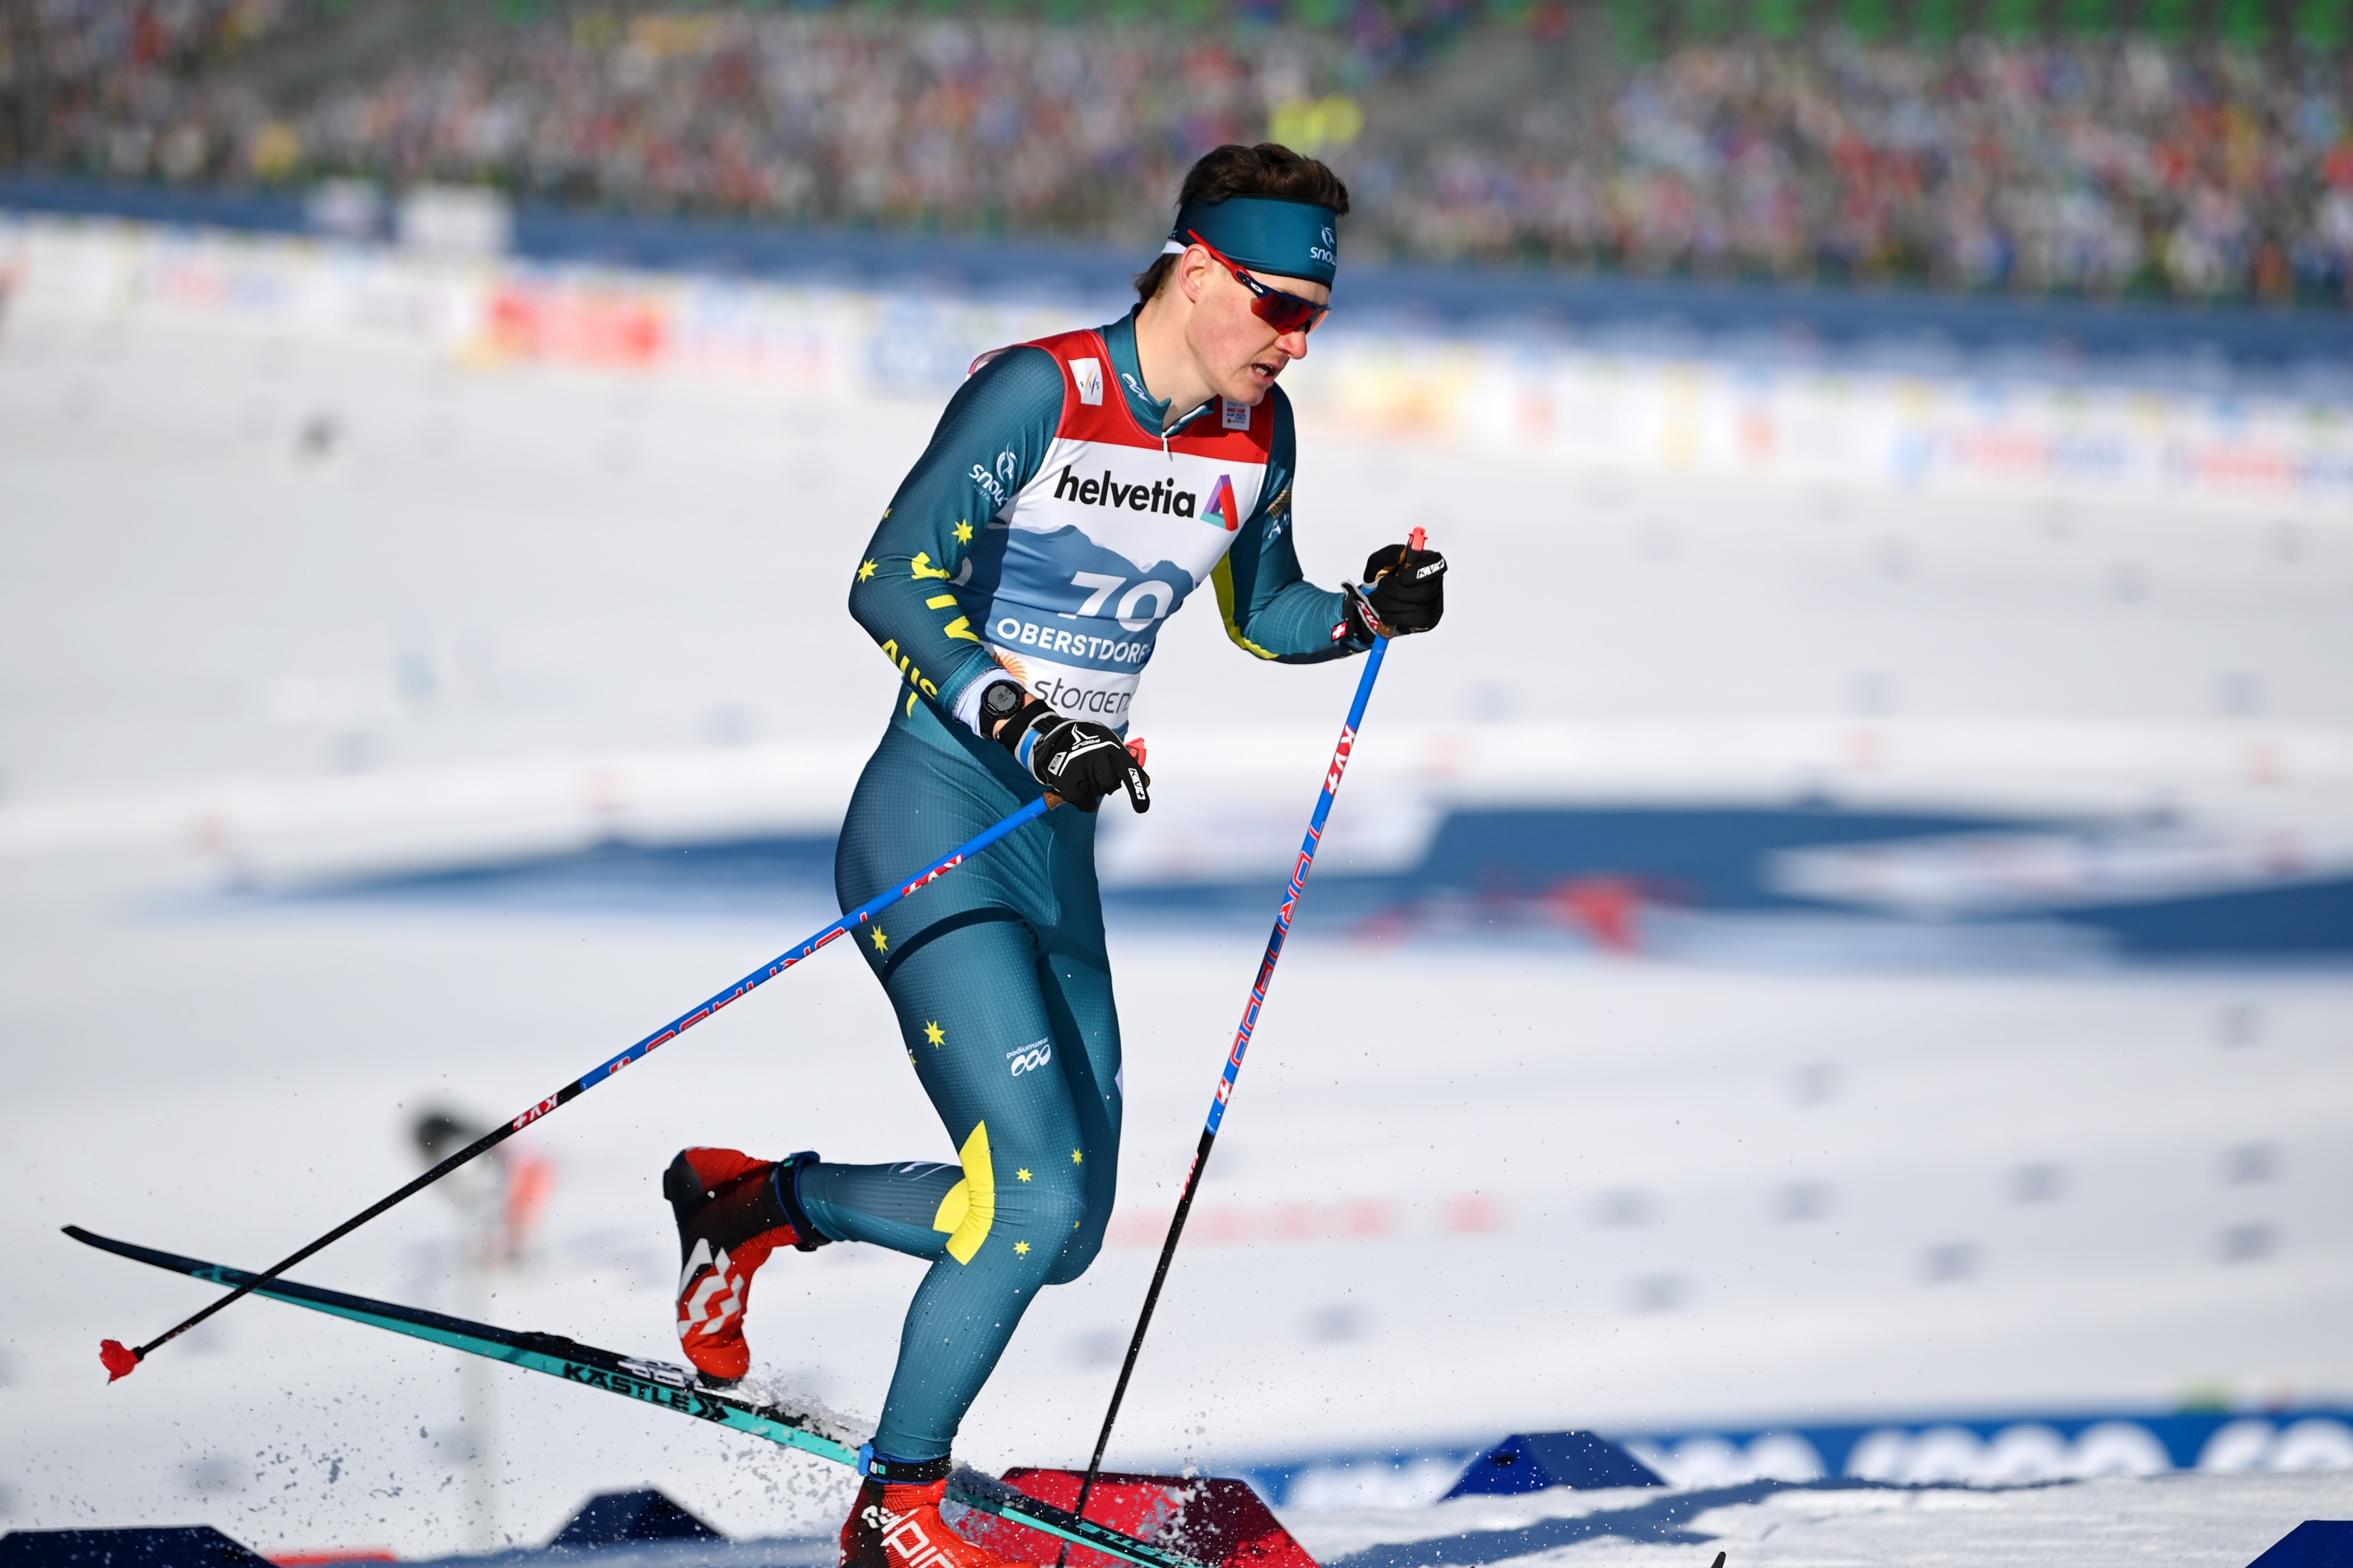 Cross-country skier Seve de Campo mid competition.